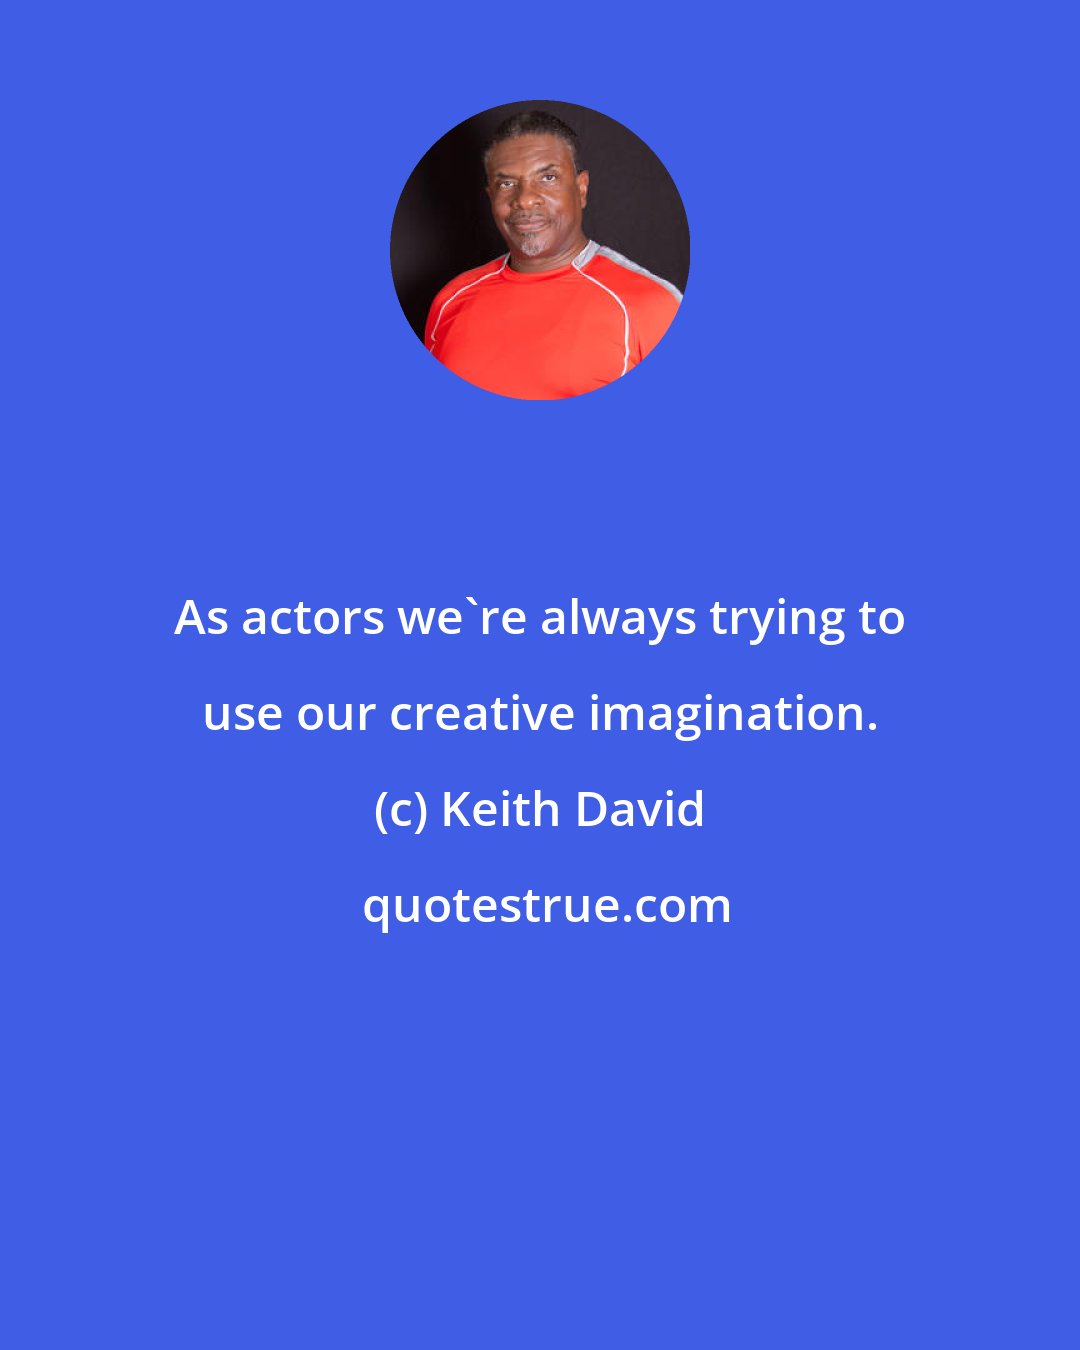 Keith David: As actors we're always trying to use our creative imagination.